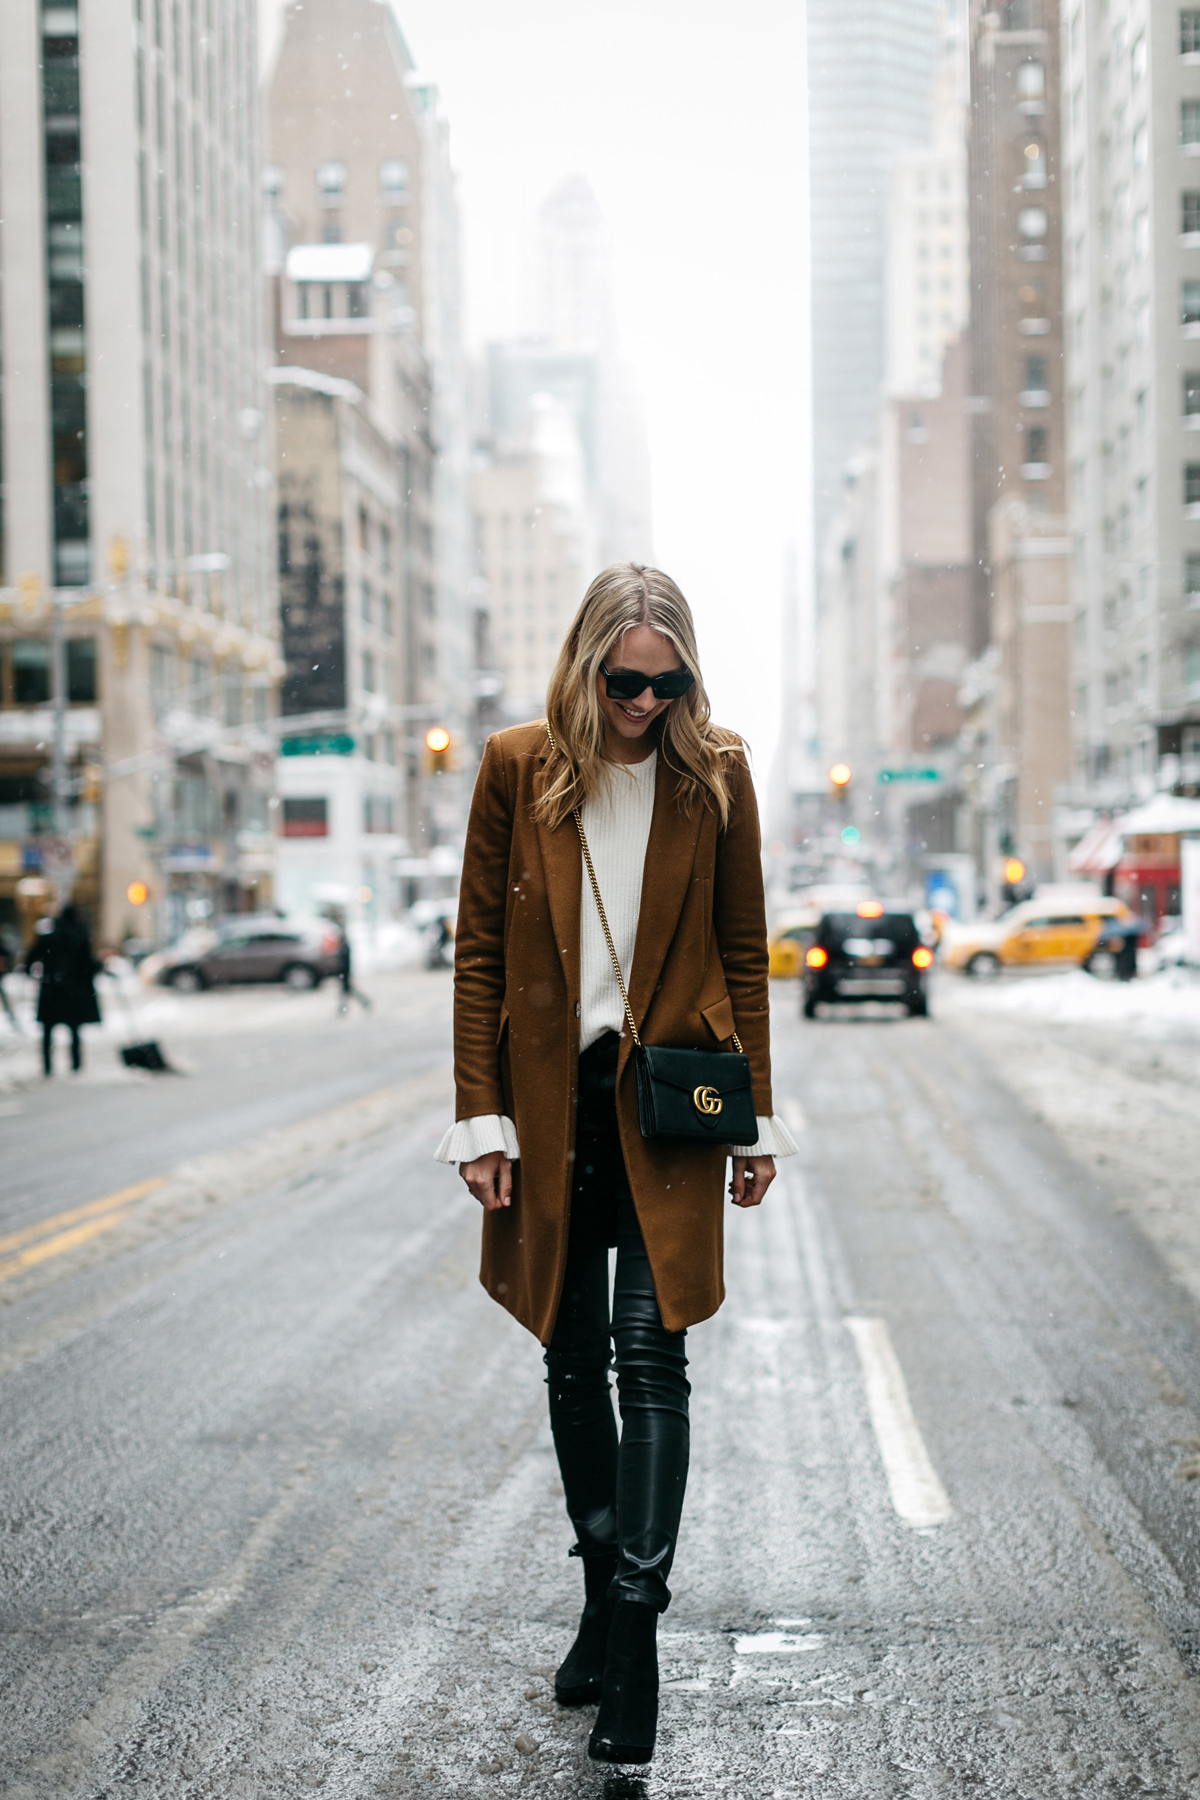 NYFW, Winter Outfit, Camel Wool Coat, White Ruffle Sleeve Sweater, Black Faux Leather Pants, Black Booties, Gucci Marmont Handbag, Street Style